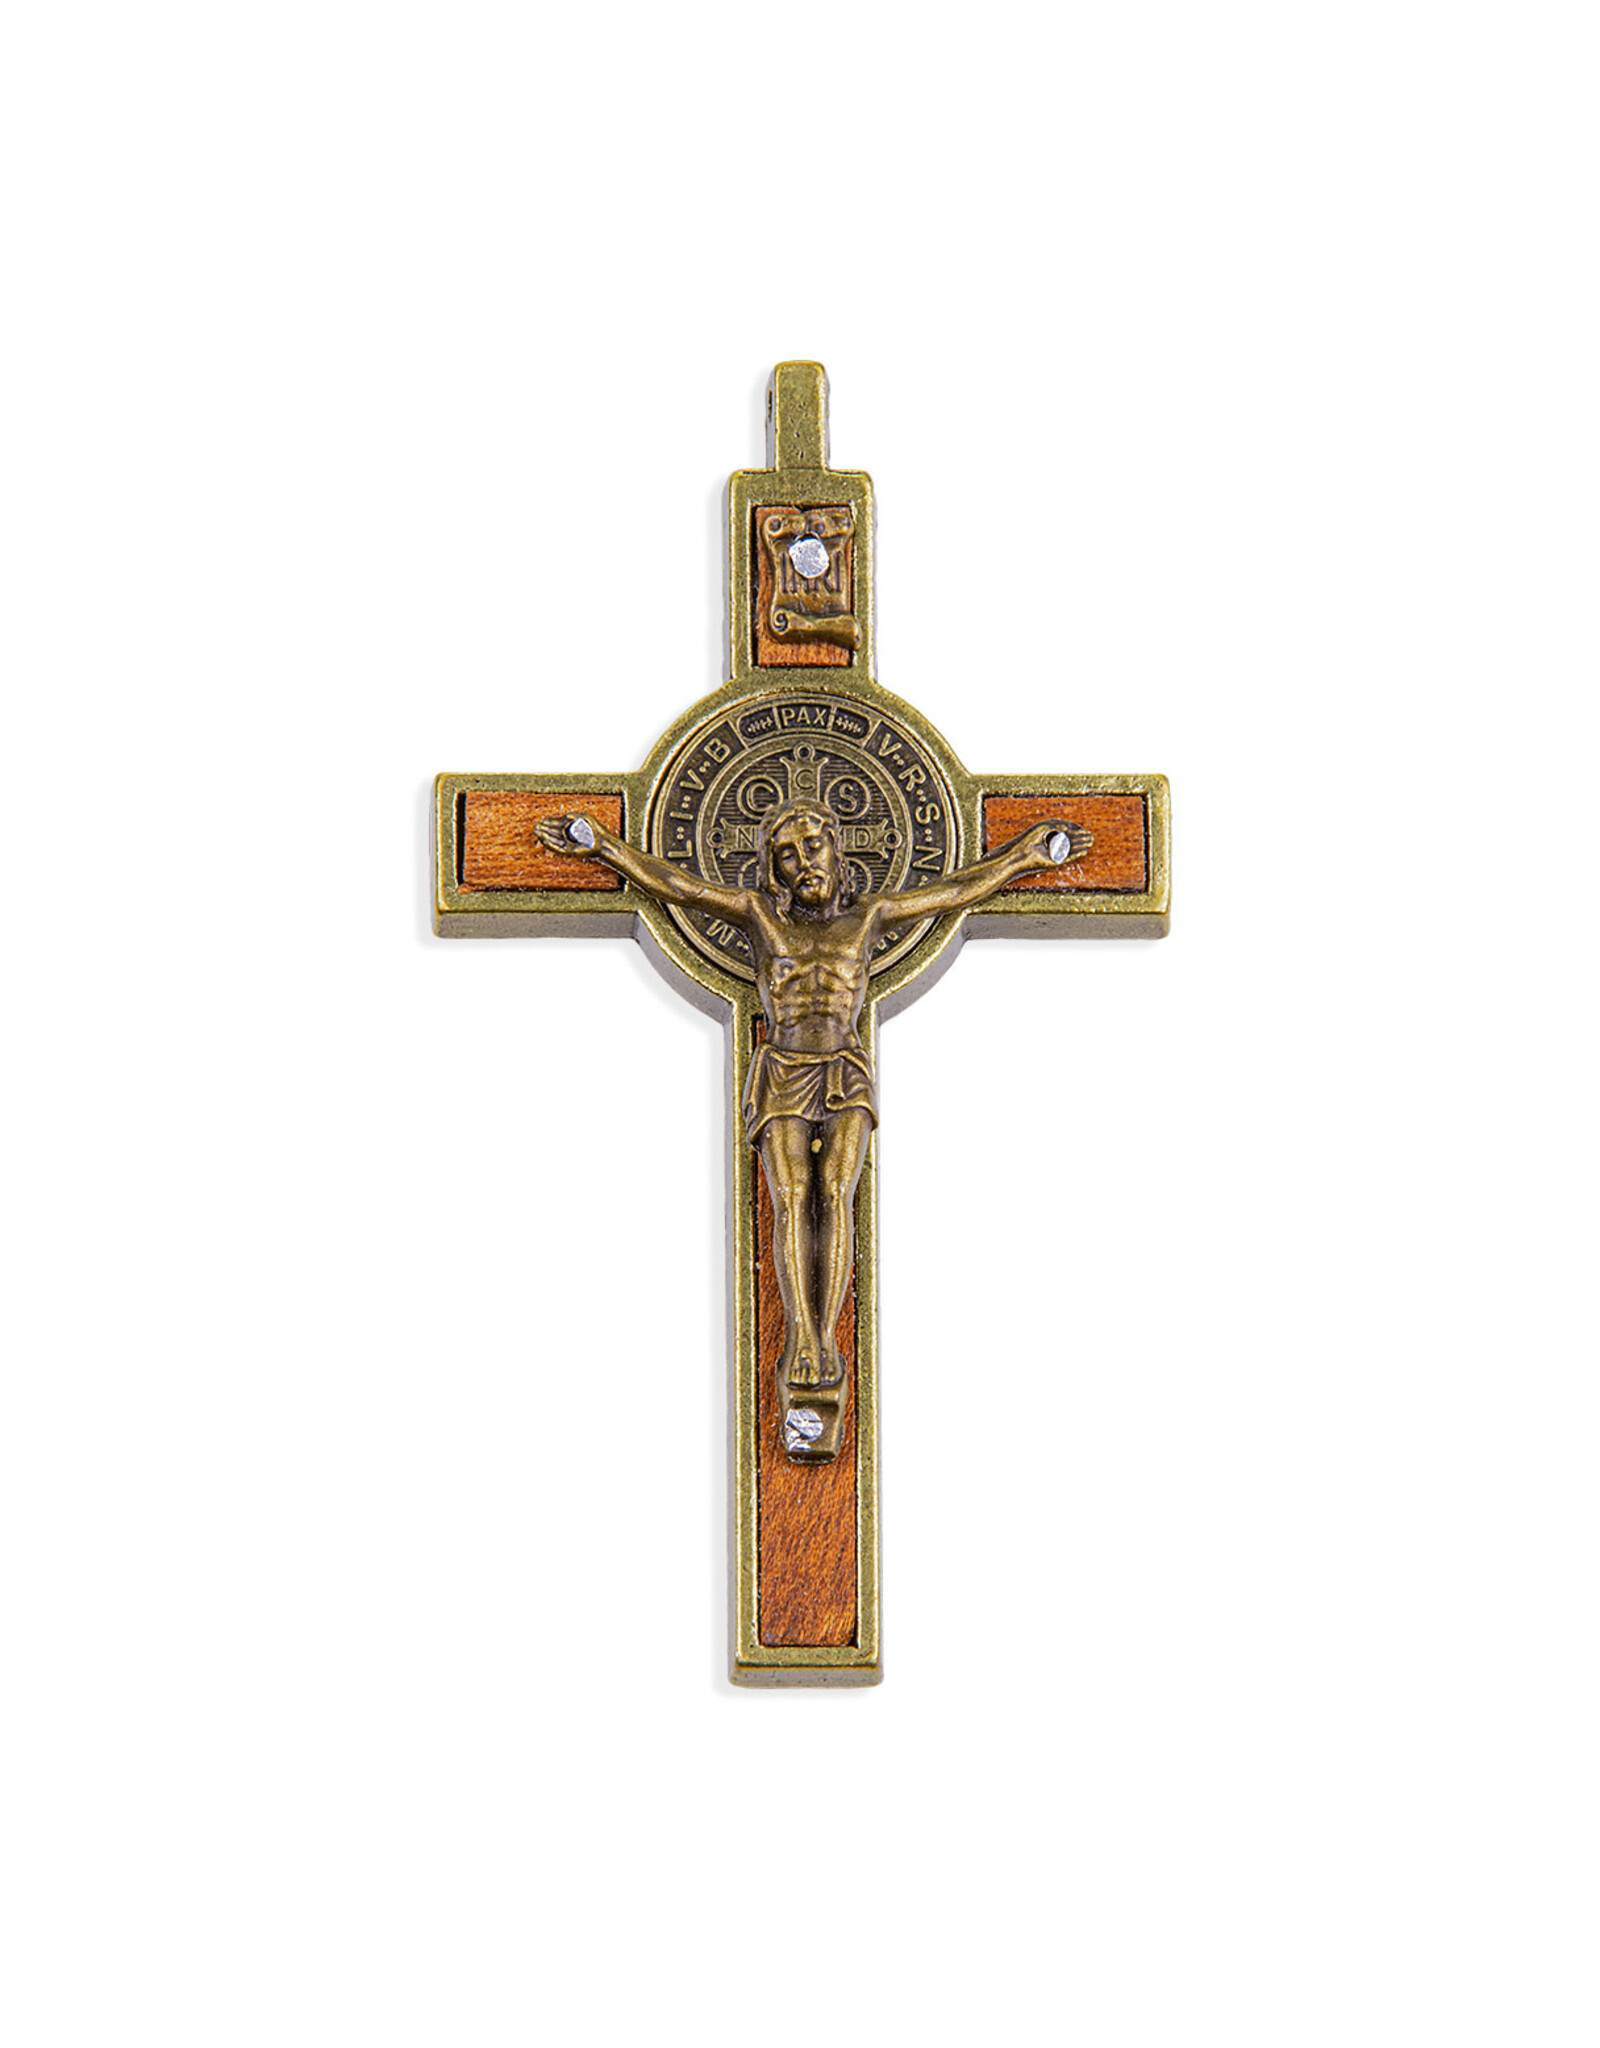 Hirten Crucifix -St. Benedict Medal with Mohagany Wood Inlay in Antique Bronze Finish, 3 1/4"